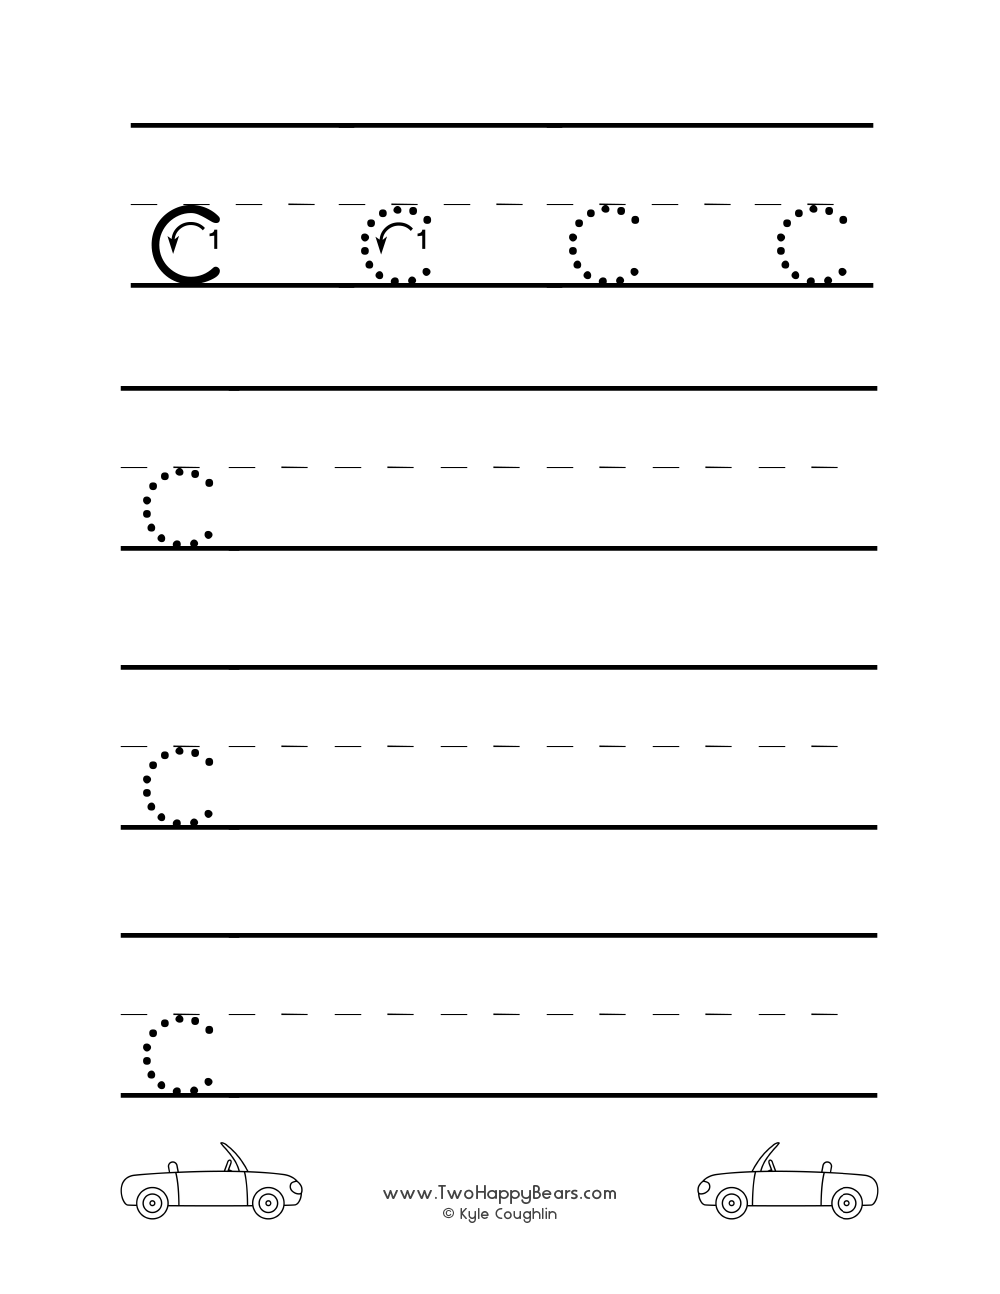 Worksheet for tracing and writing the lowercase letter C, in free printable PDF format.